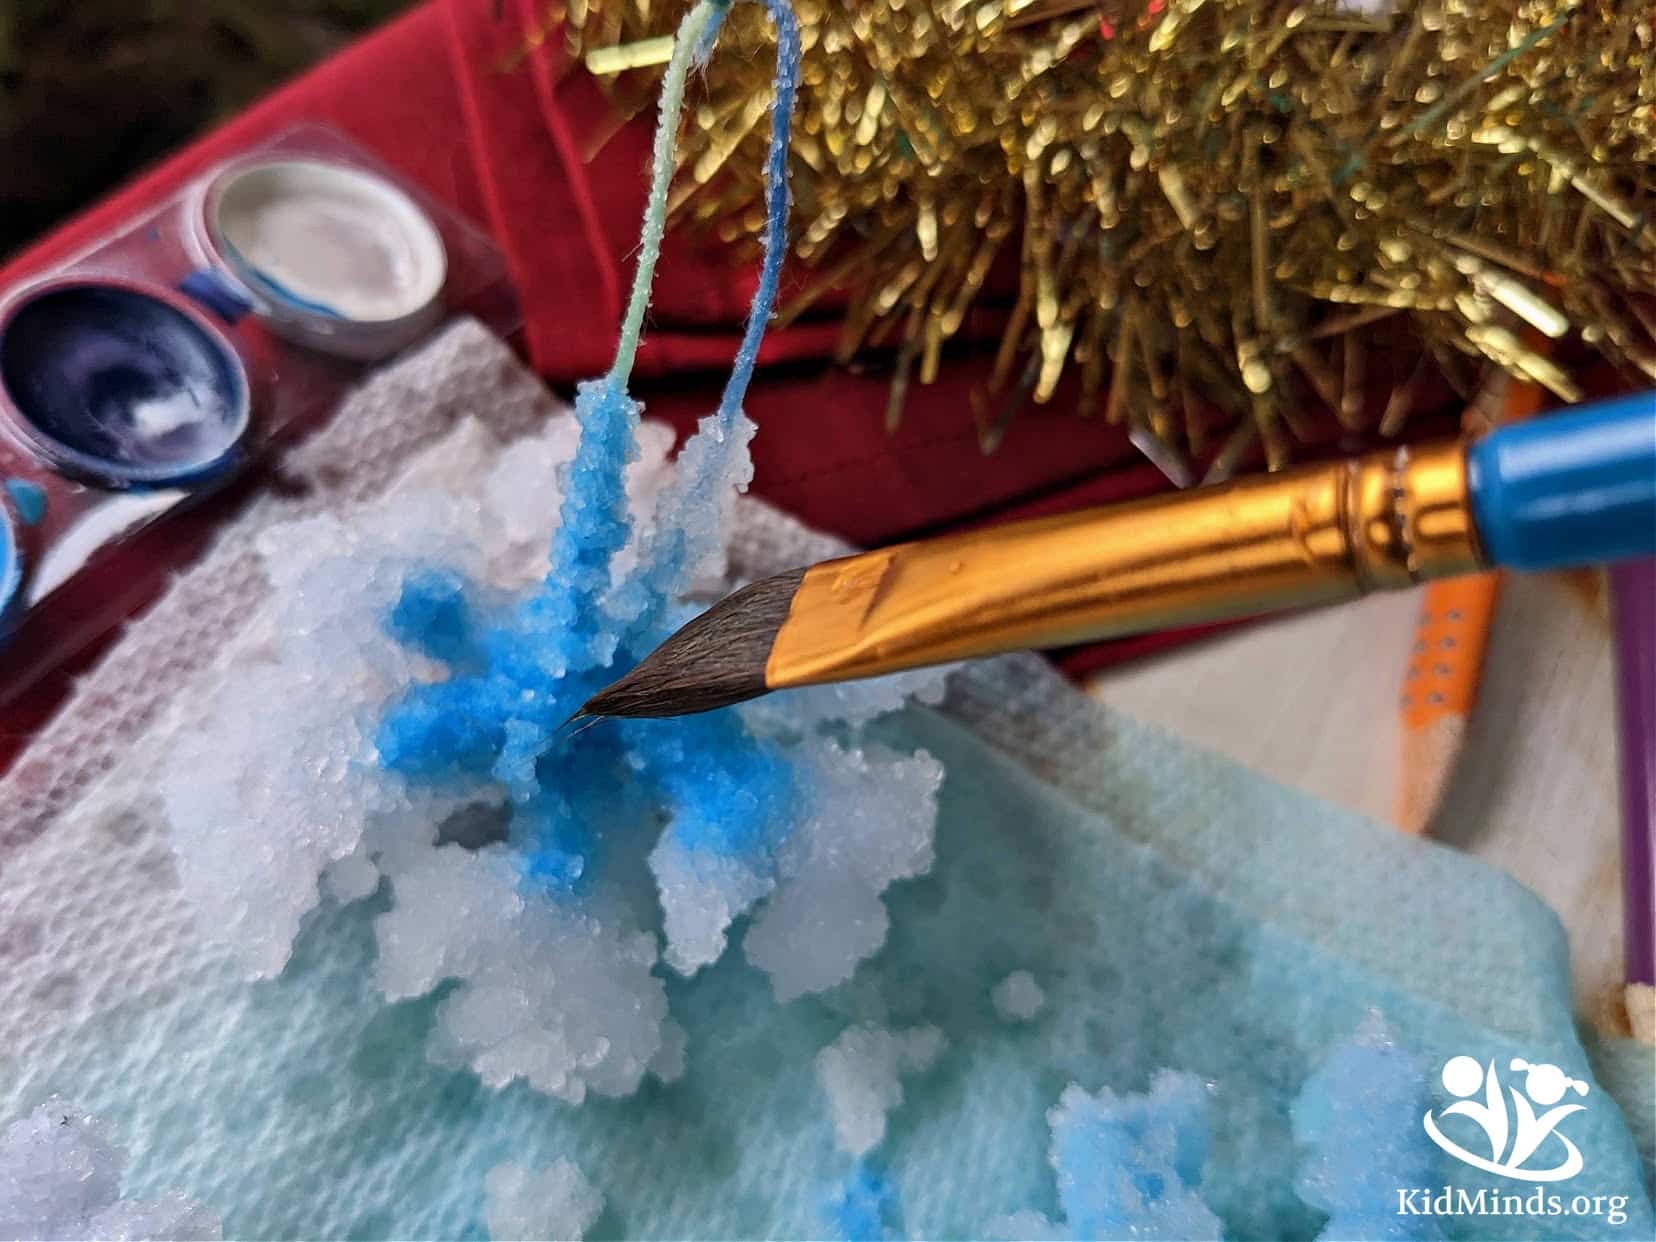 These crystal snowflakes are not only beautiful to look at, but they also offer a fantastic science lesson as well. This activity explores saturation, evaporation, solutions, how temperature affects chemistry, and how molecules can fit together in a repeated pattern (crystallization) . #kidscience #STEM #elementaryeducation #kidminds #handsonlearning #kidsactivities